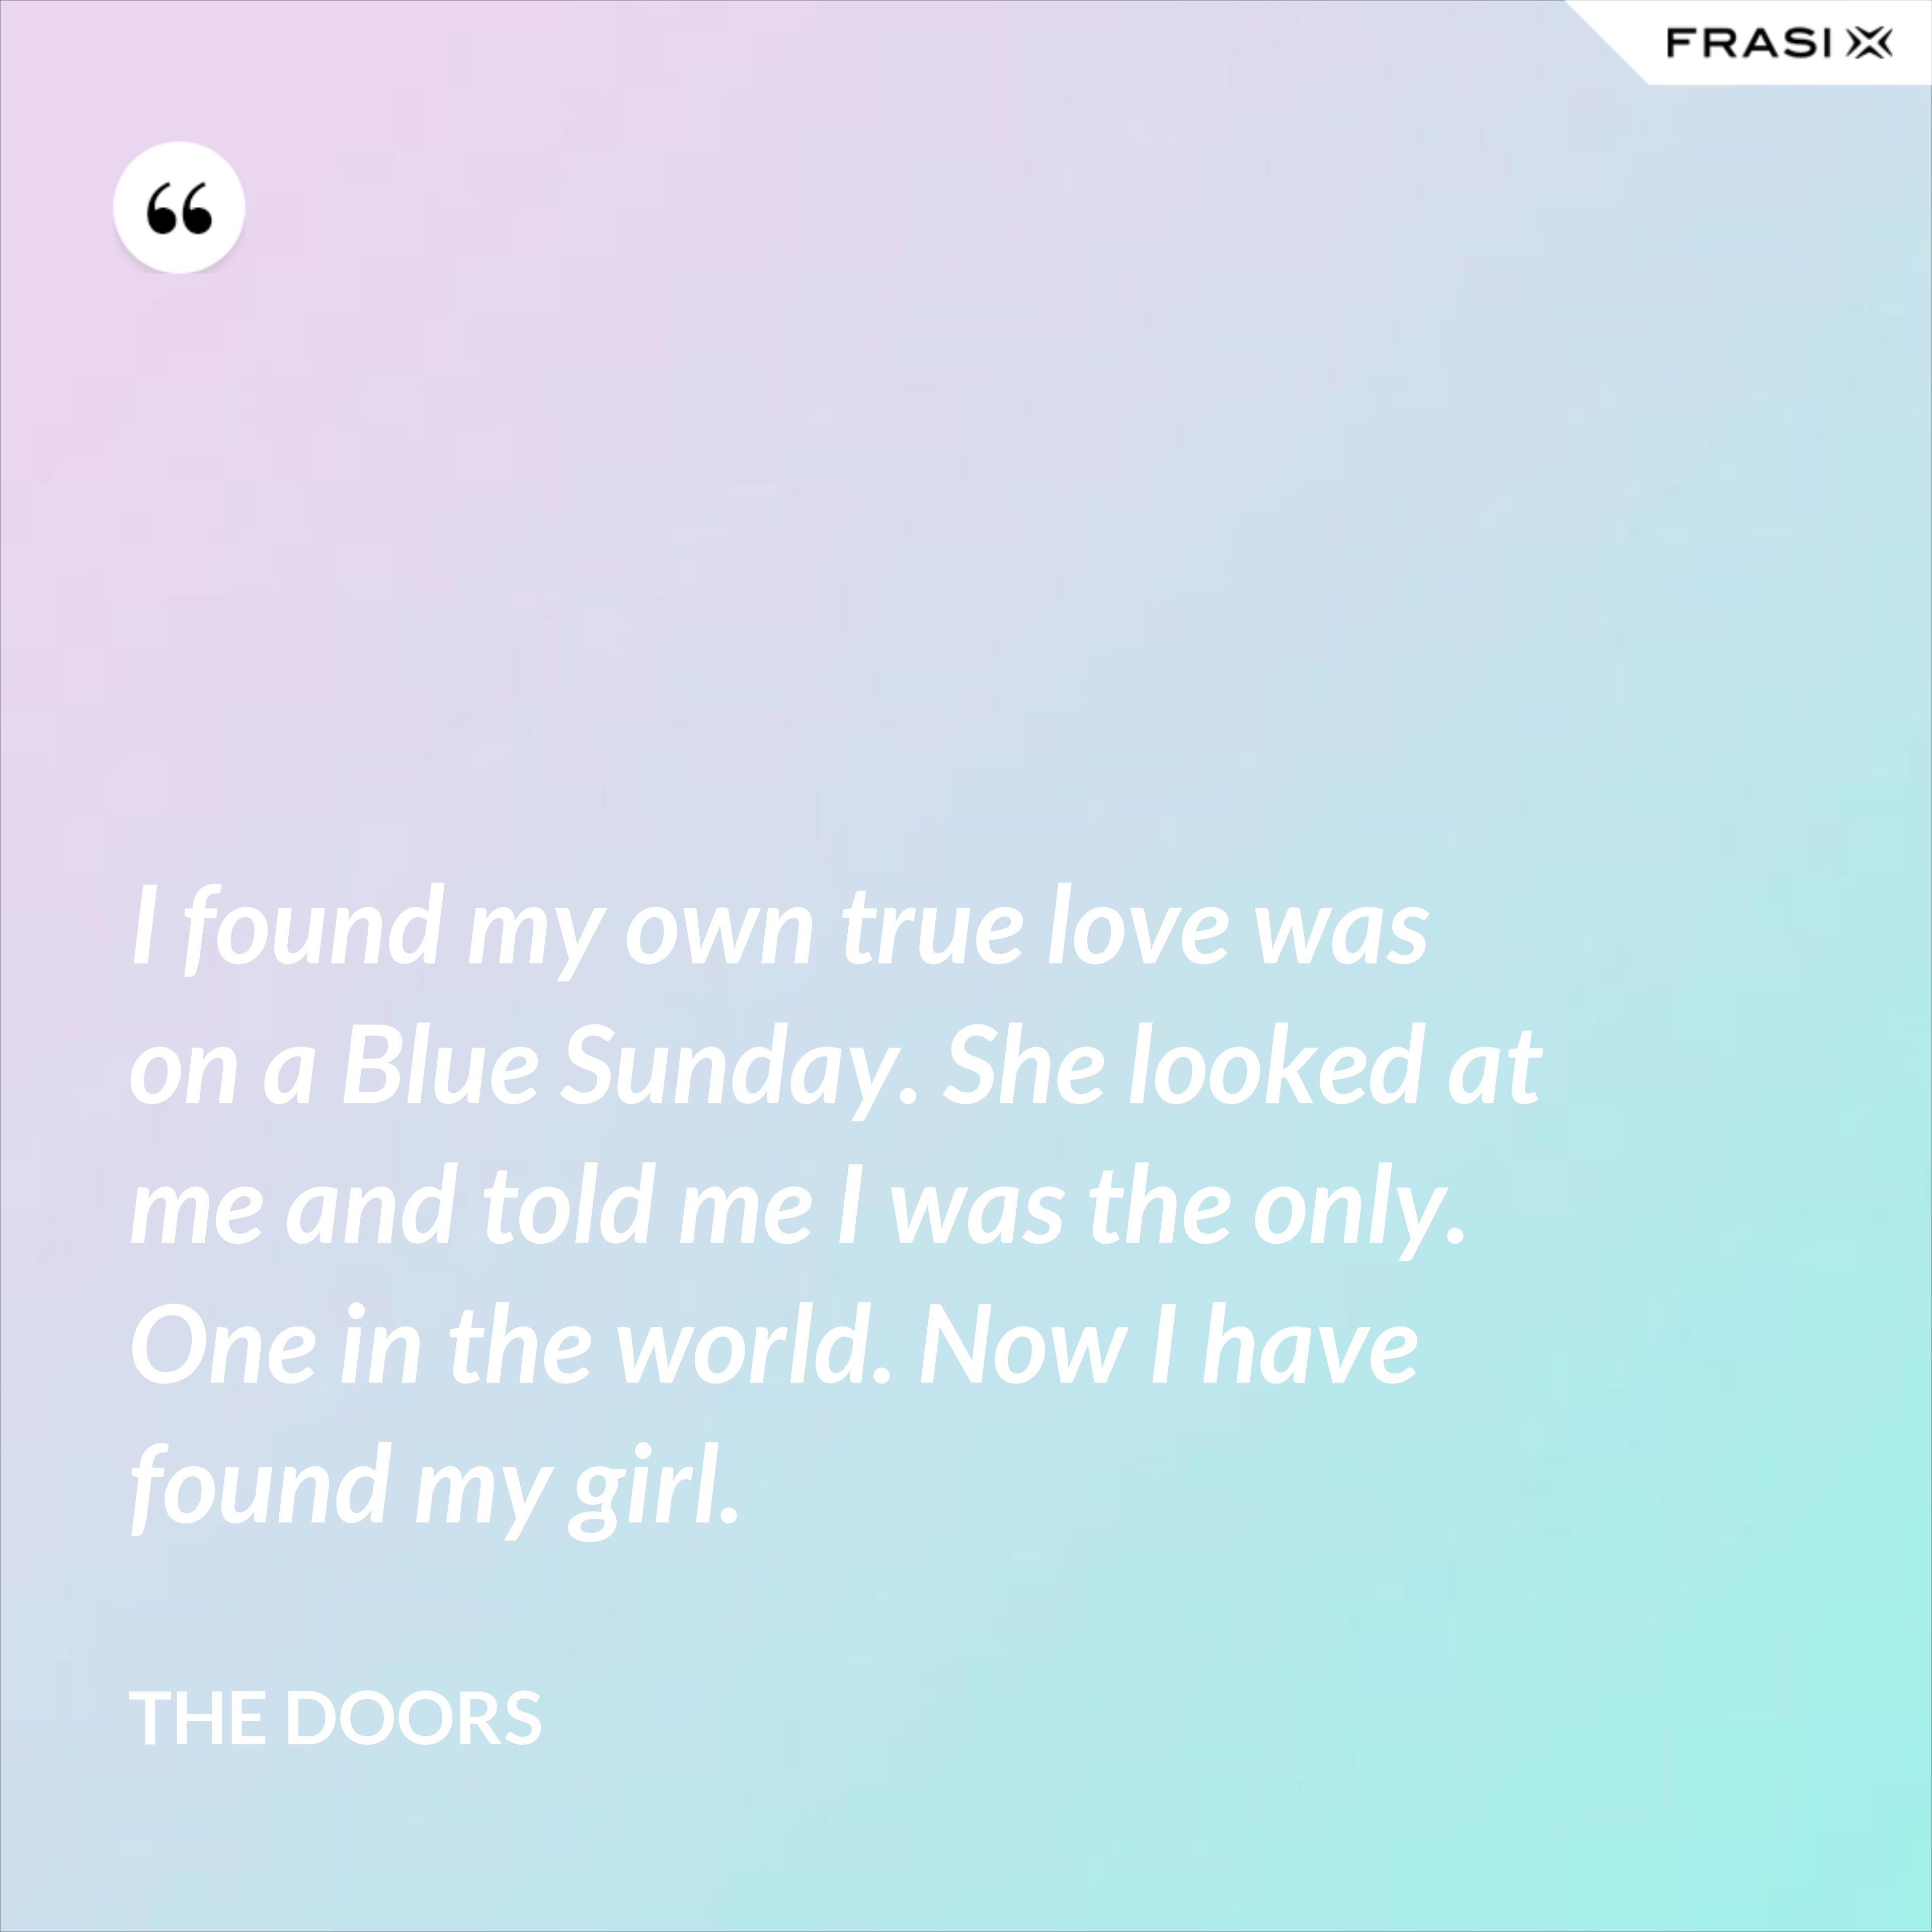 I found my own true love was on a Blue Sunday. She looked at me and told me I was the only. One in the world. Now I have found my girl. - The Doors